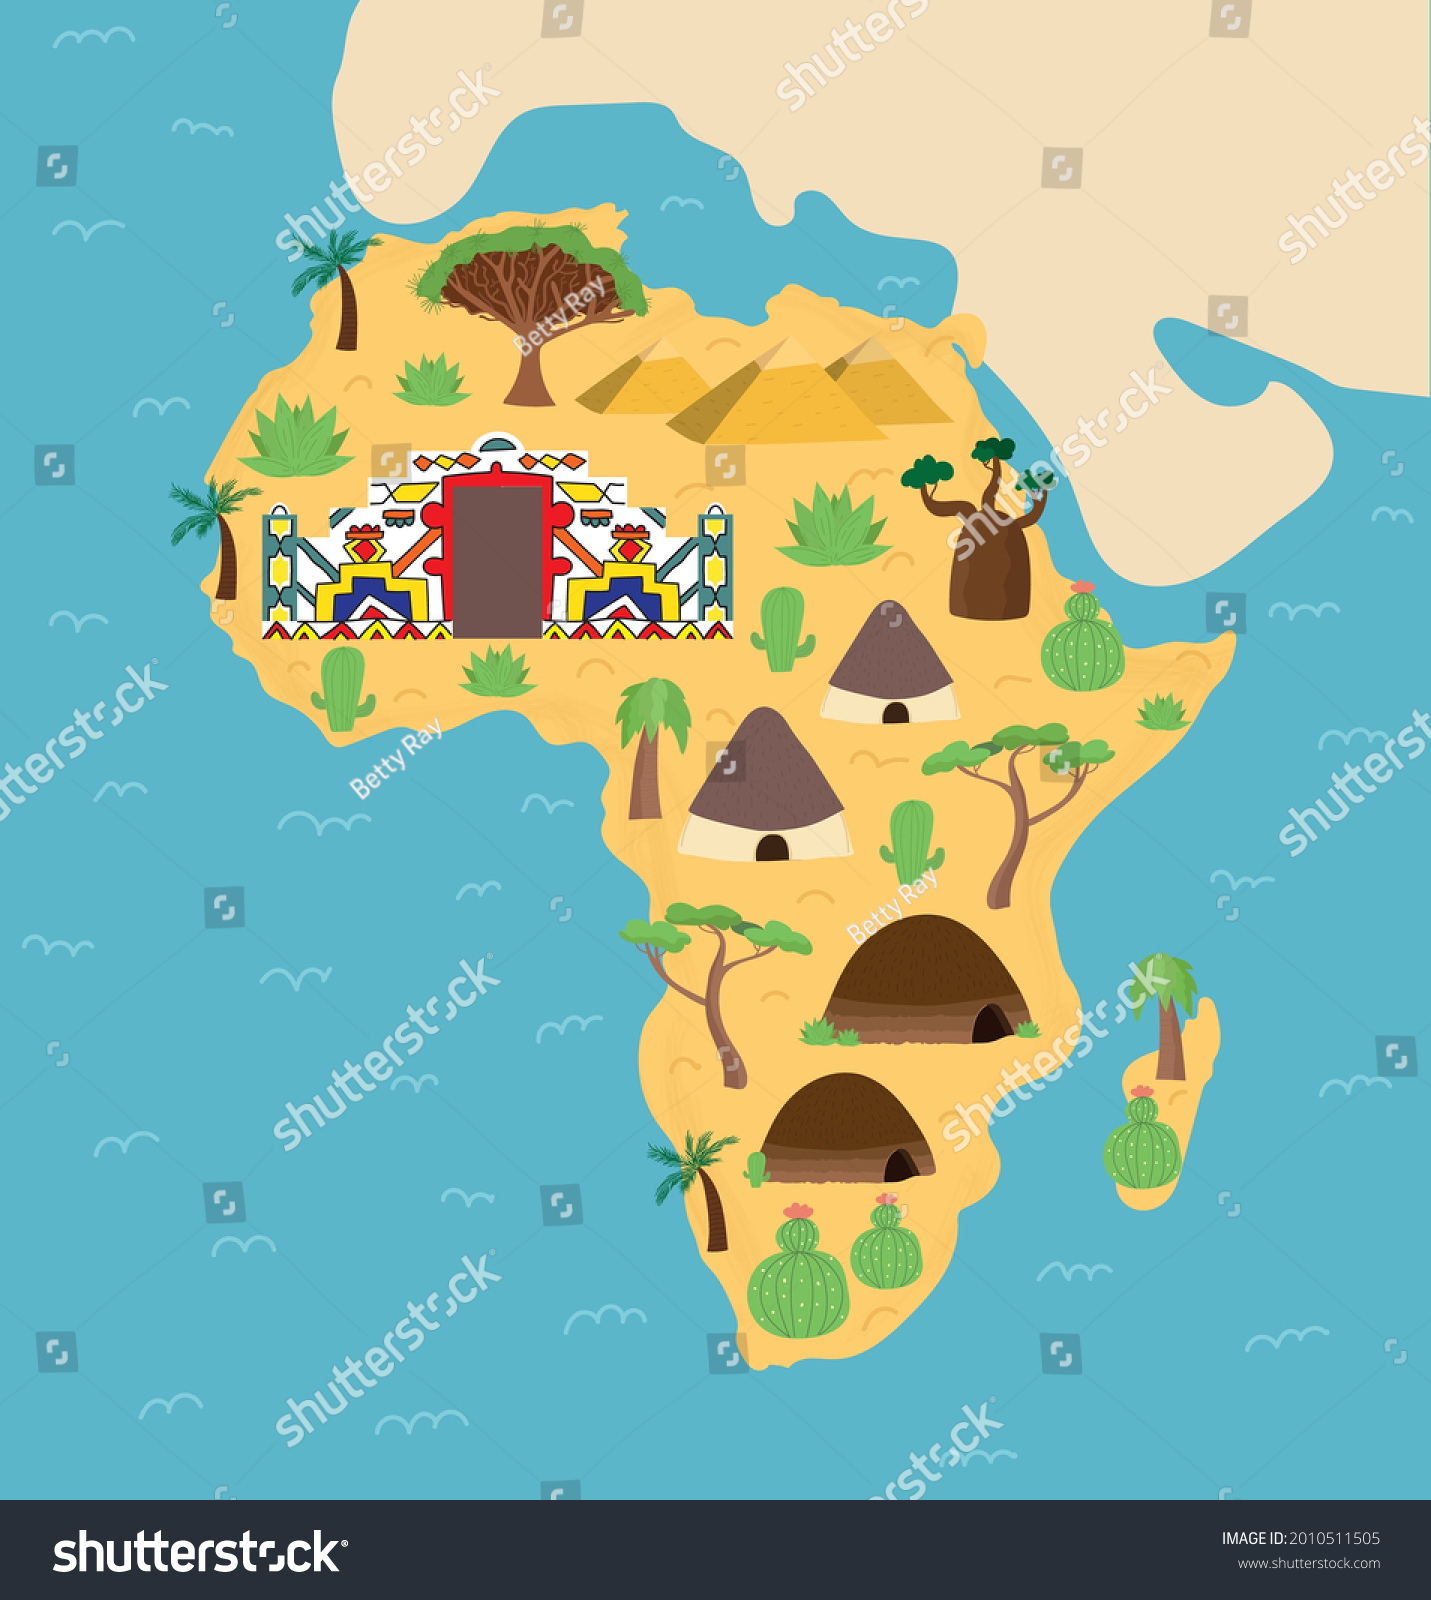 Cartoon Hand Drawn Illustrated Map Africa Stock Vector Royalty Free 2010511505 Shutterstock 4036